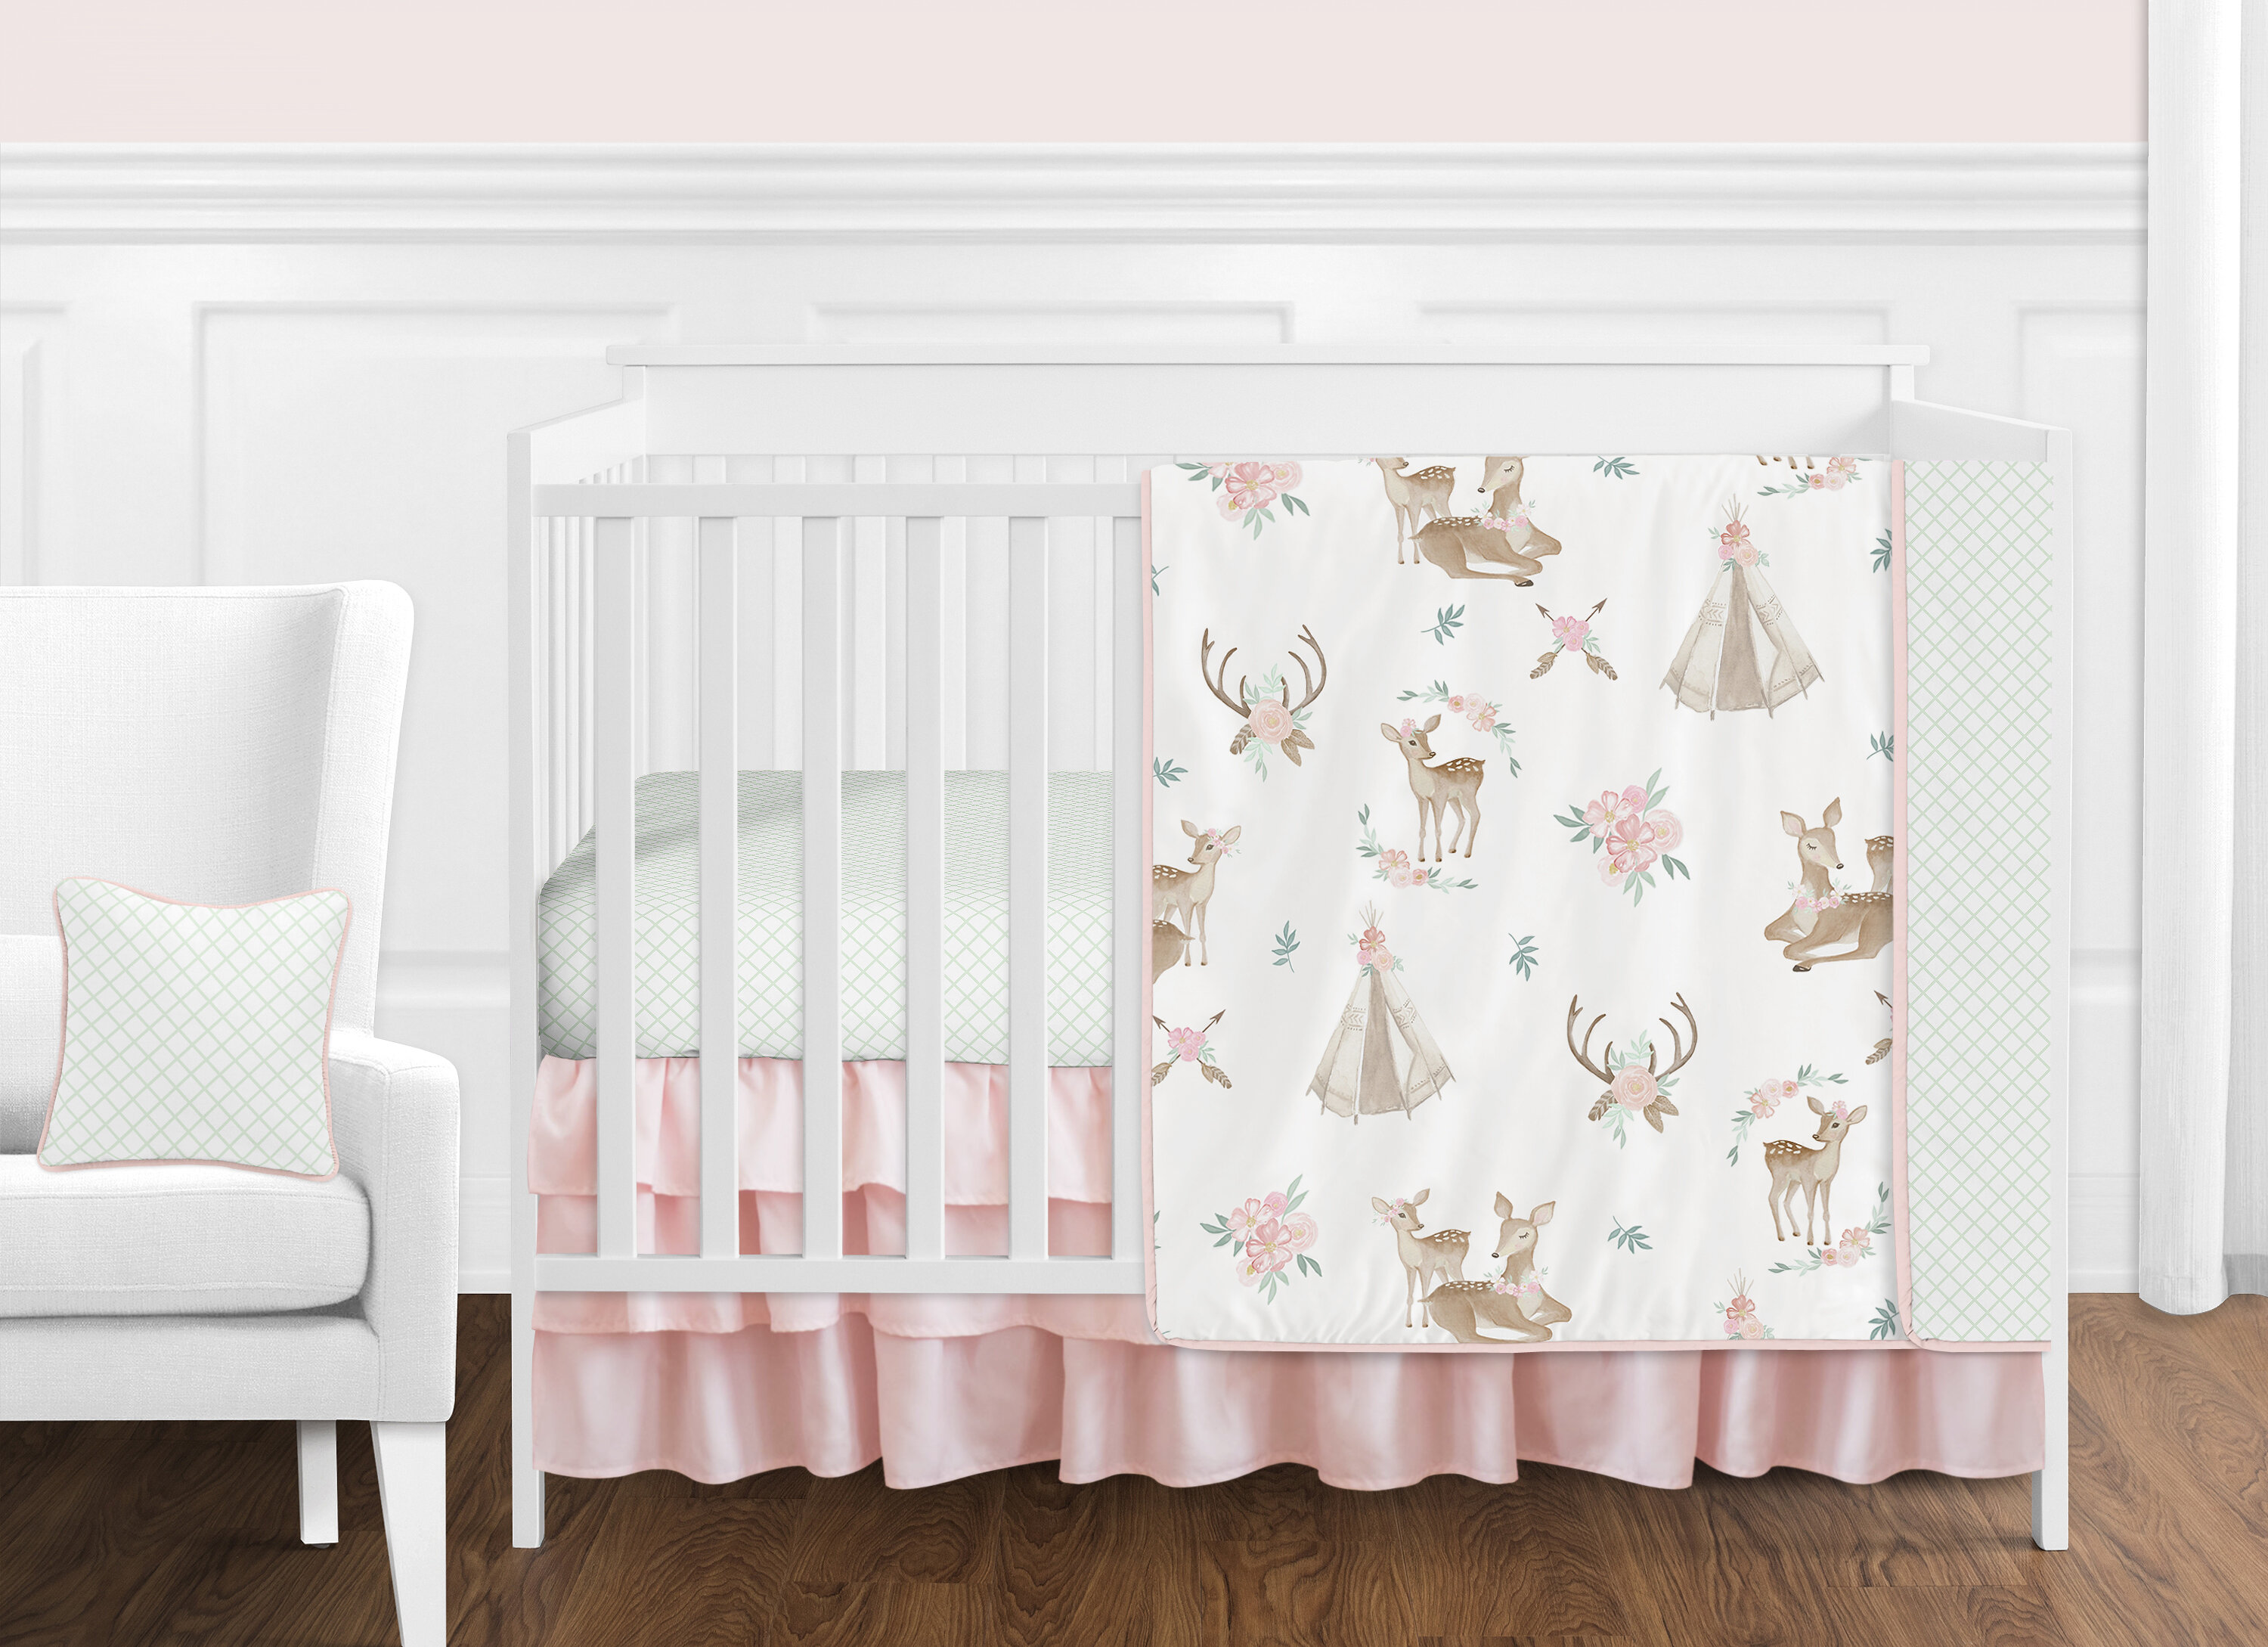 Sweet Jojo Designs Crib Bed Skirt Dust Ruffle for Grey and White Woodland Deer for Baby Boys Bedding Sets 